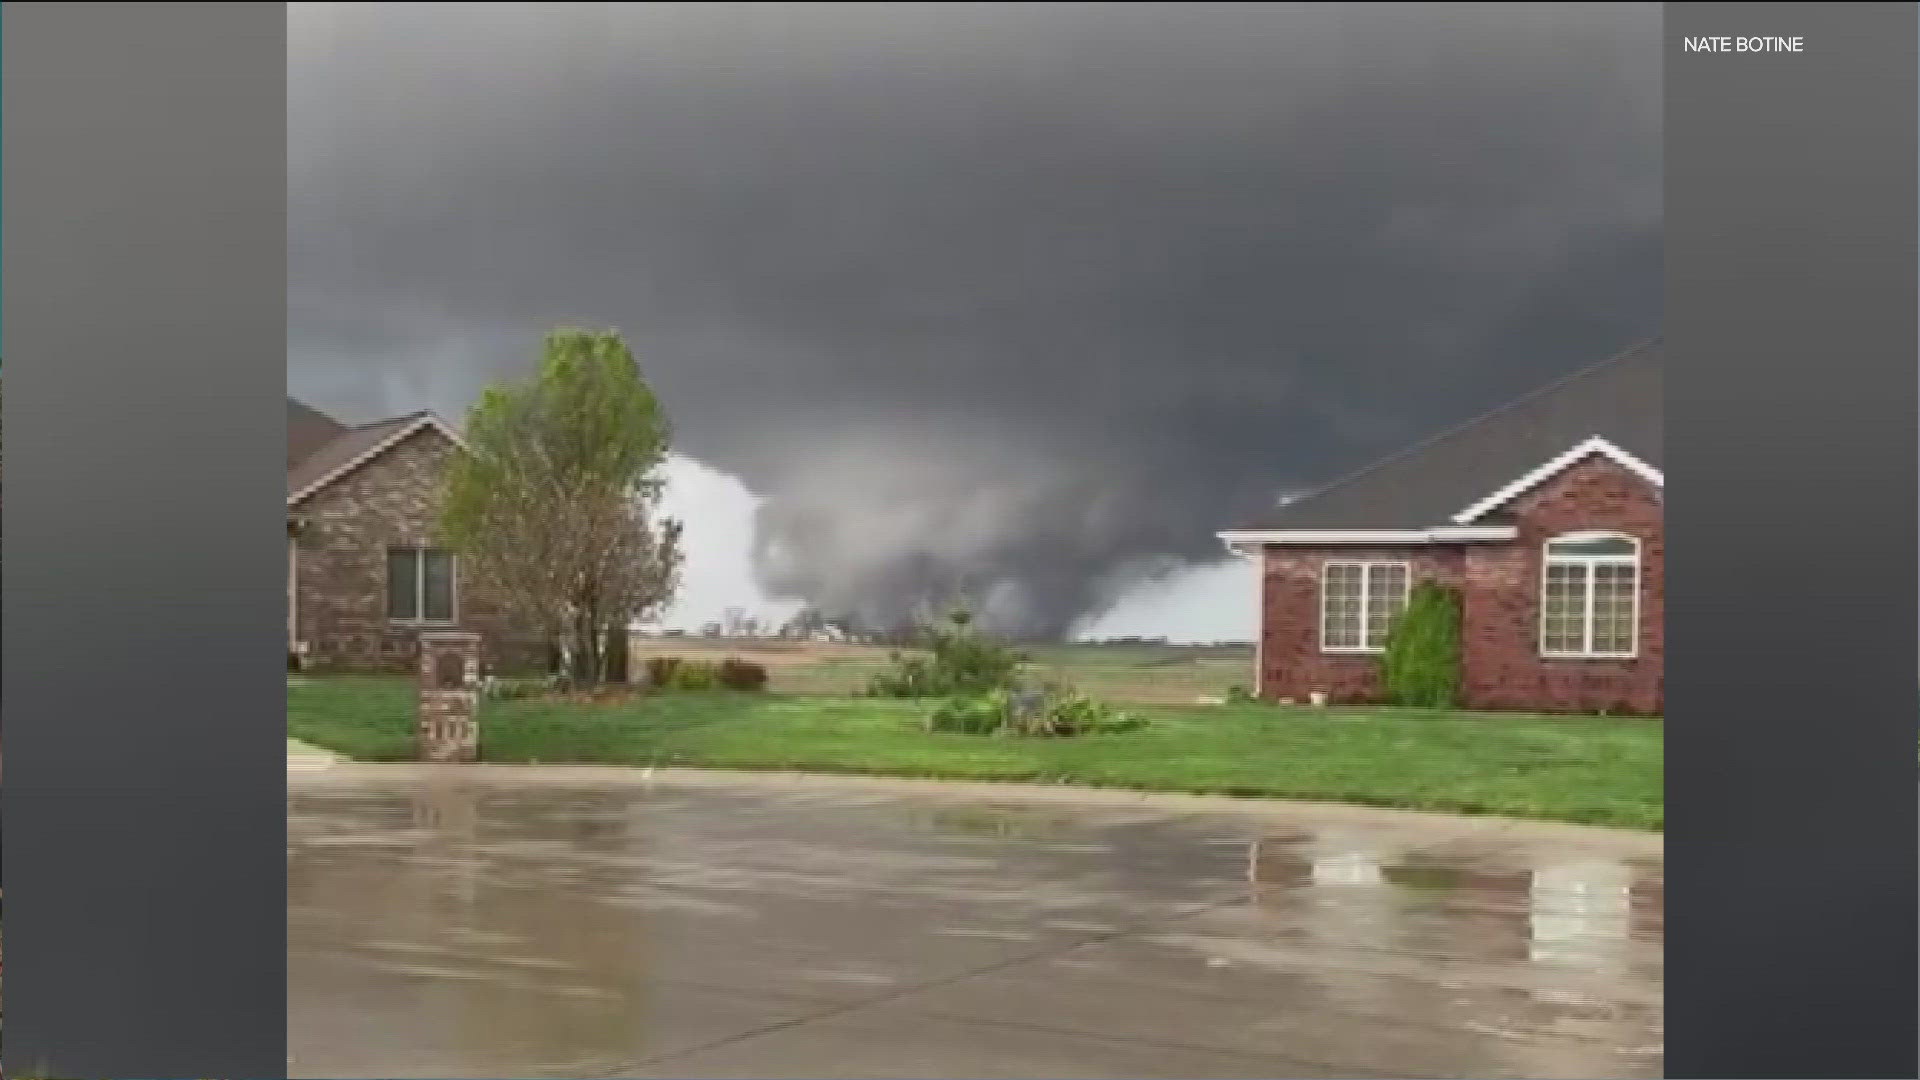 On Friday, the severe storms were spotted about 90 minutes outside of Des Moines, Iowa.